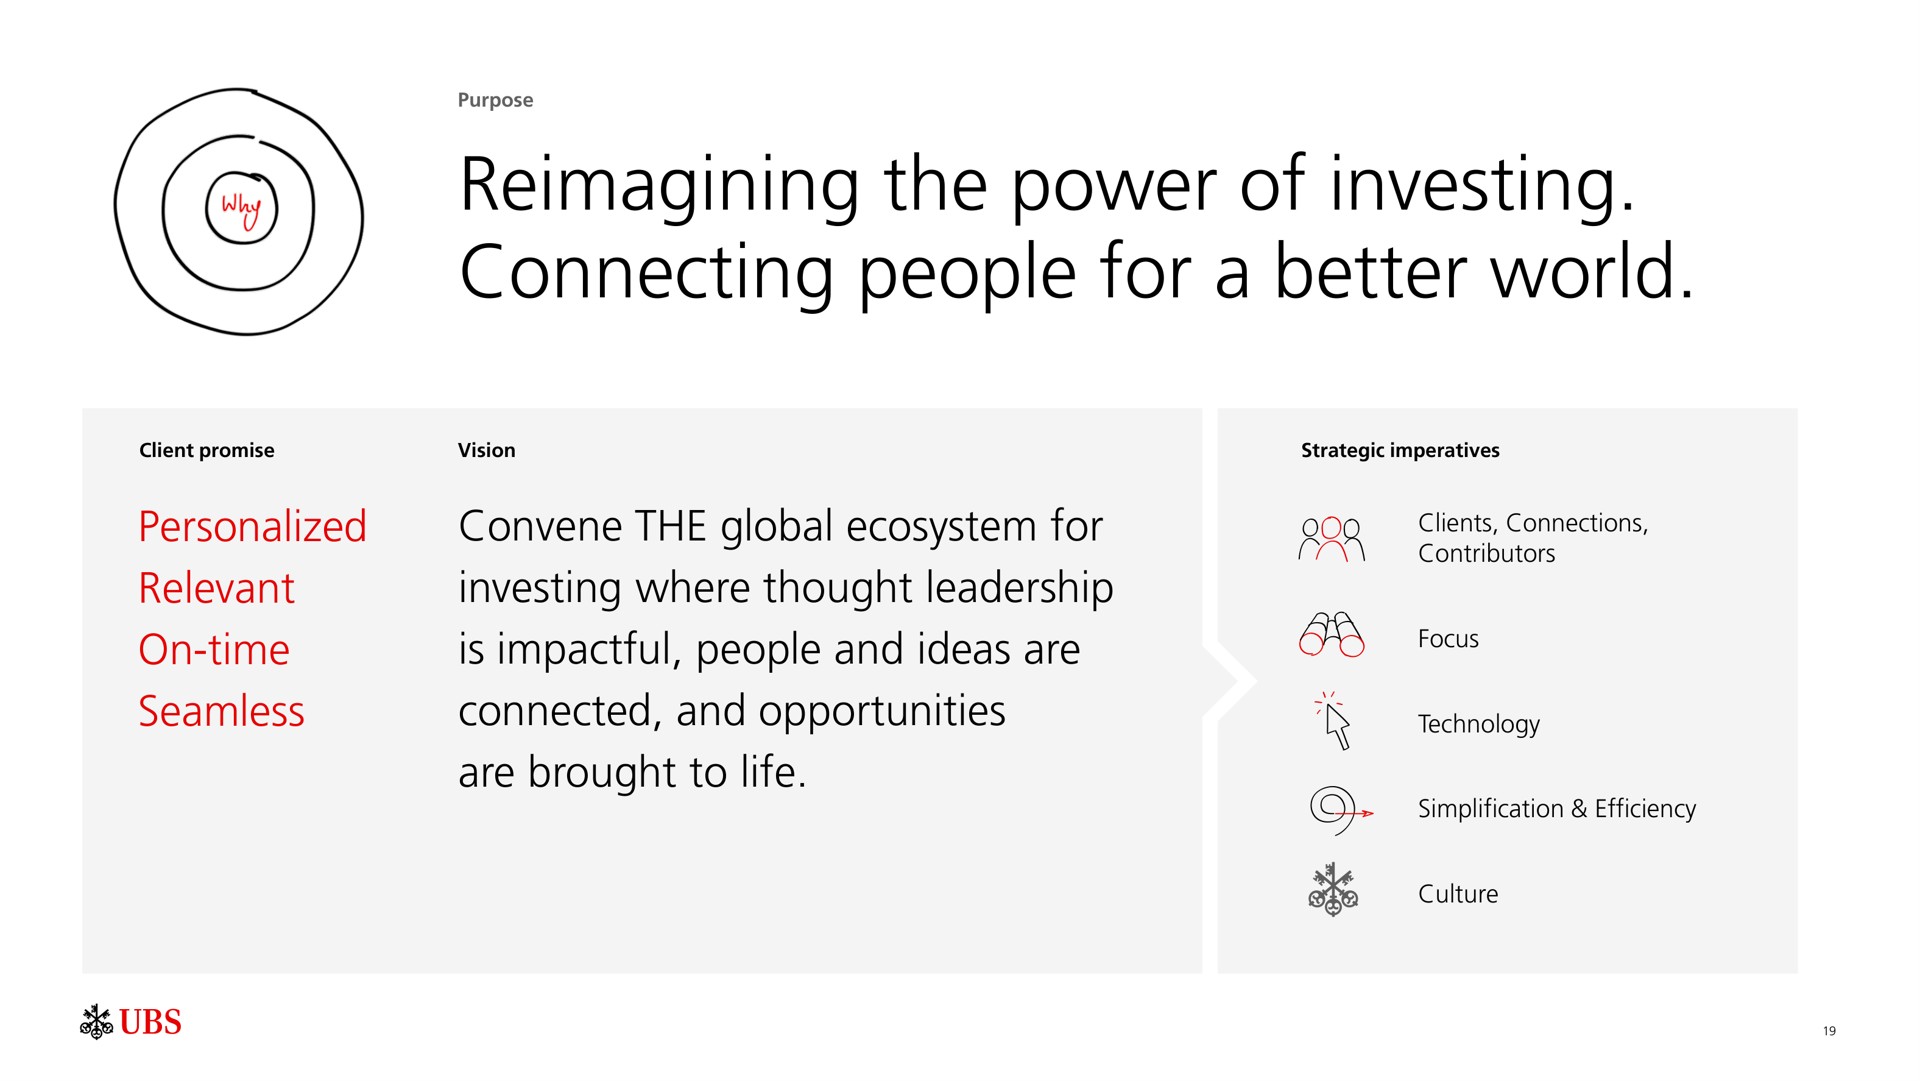 the power of investing connecting people for a better world personalized relevant on time seamless convene the global ecosystem for investing where thought leadership is people and ideas are connected and opportunities are brought to life gor focus | UBS